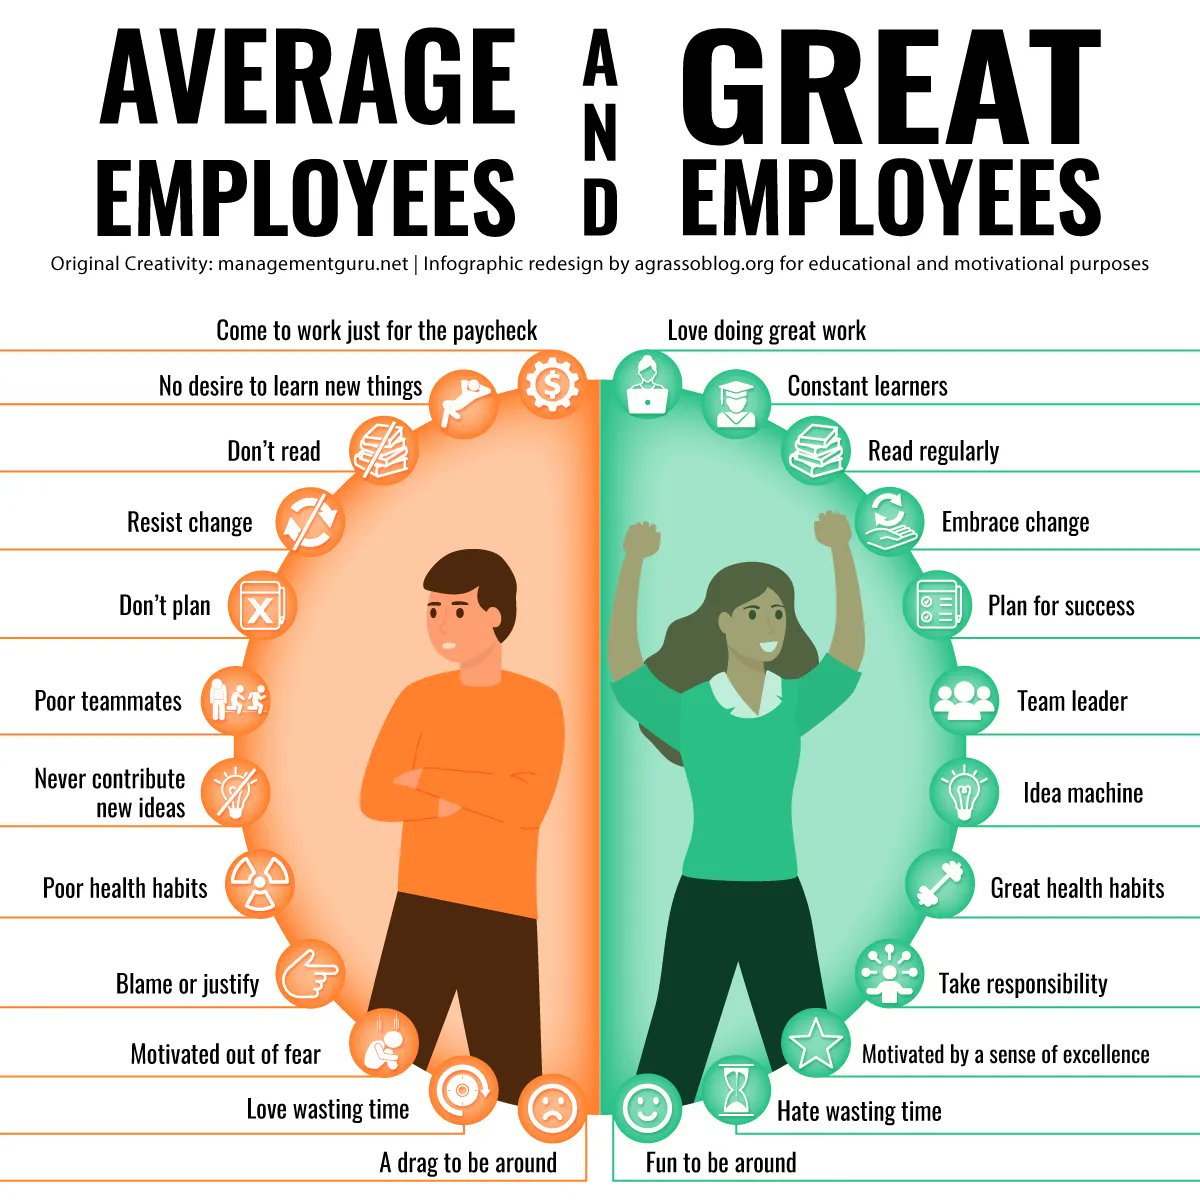 You can be an average employee, or you can choose to excel at work. It's only up to you. {Infographic} via @LindaGrass0 #EmployeeEngagement #Strategy #Motivation